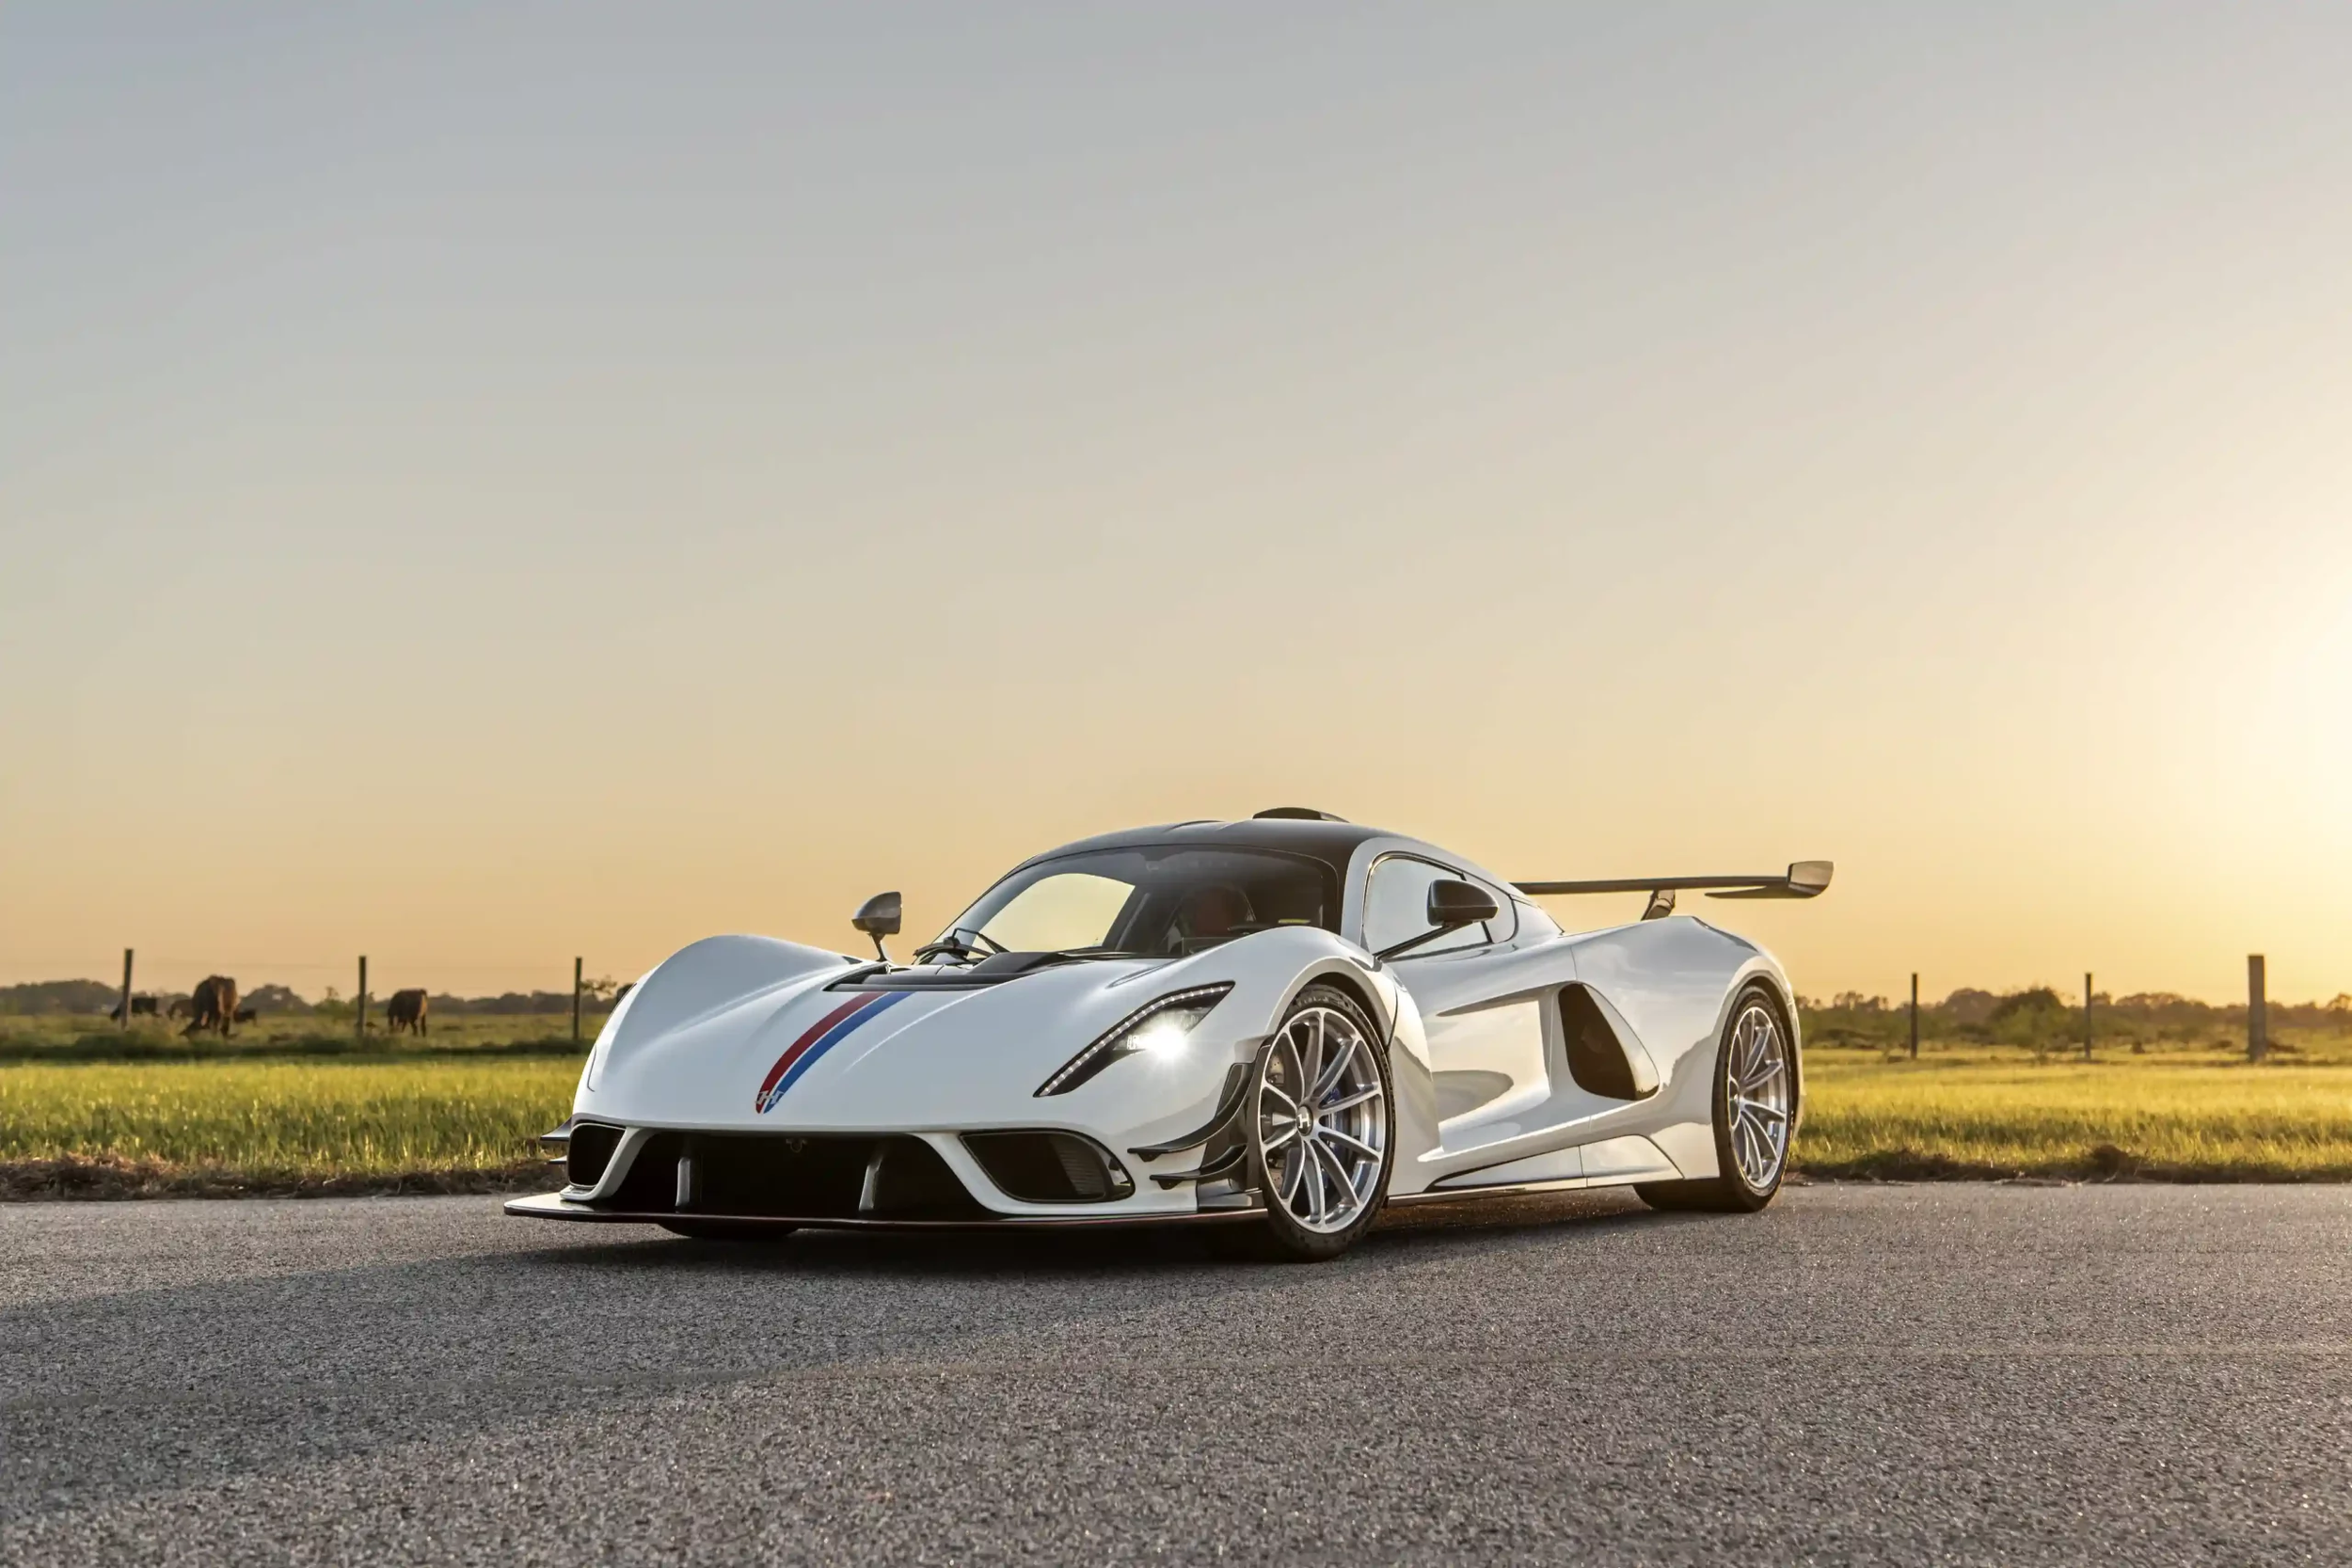 Hennessey Venom F5 May Be New World's Fastest Car: Specs, Photos